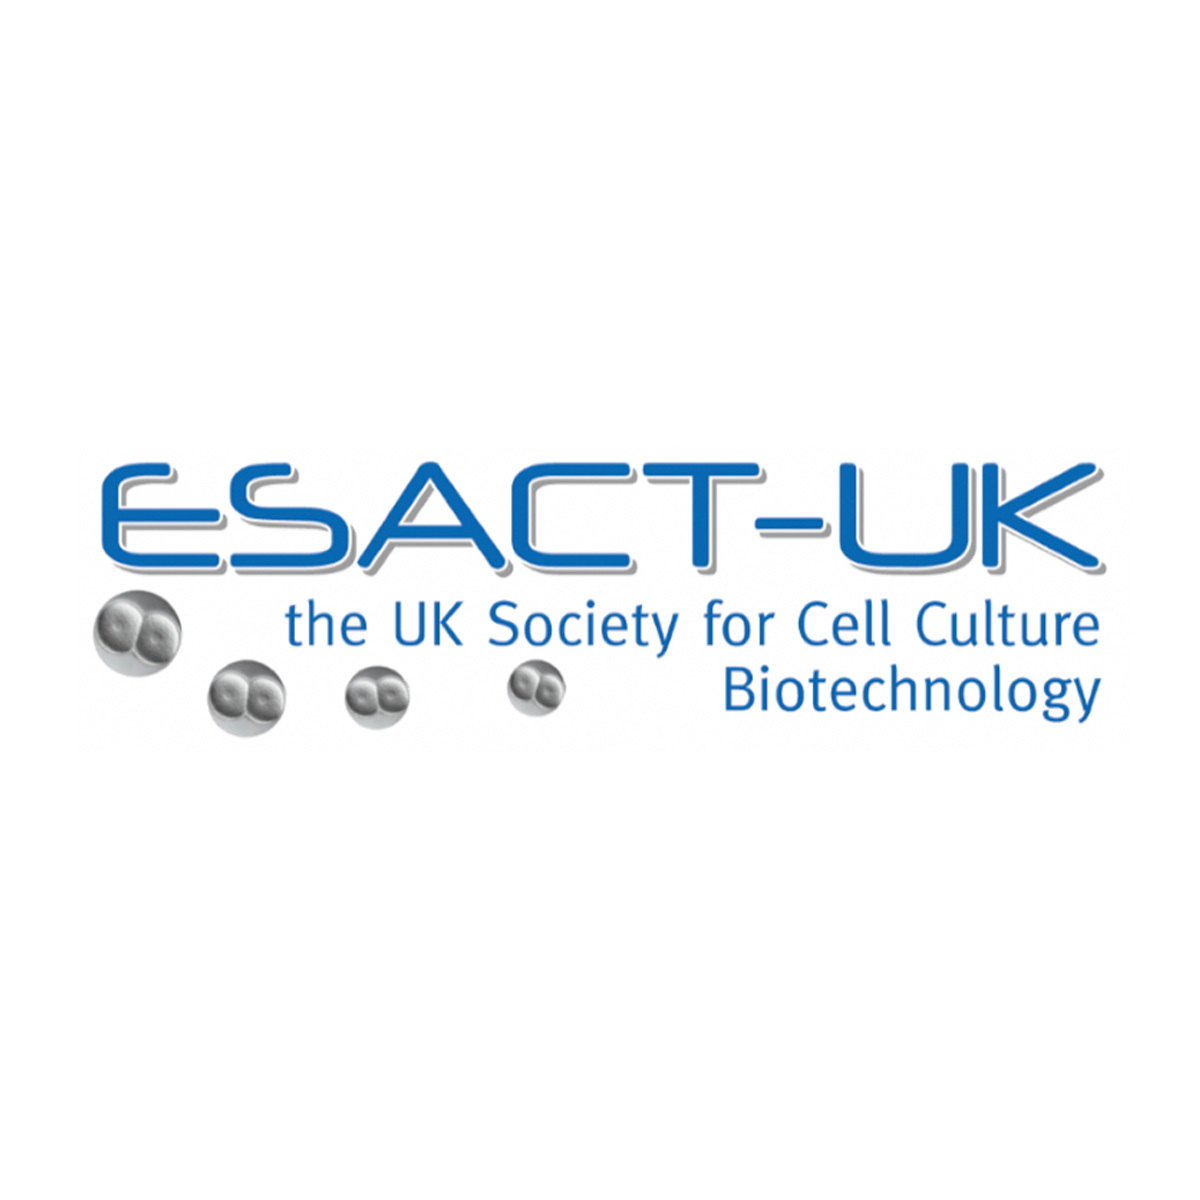 ESACT UK – The UK Society for Cell Culture Biotechnology